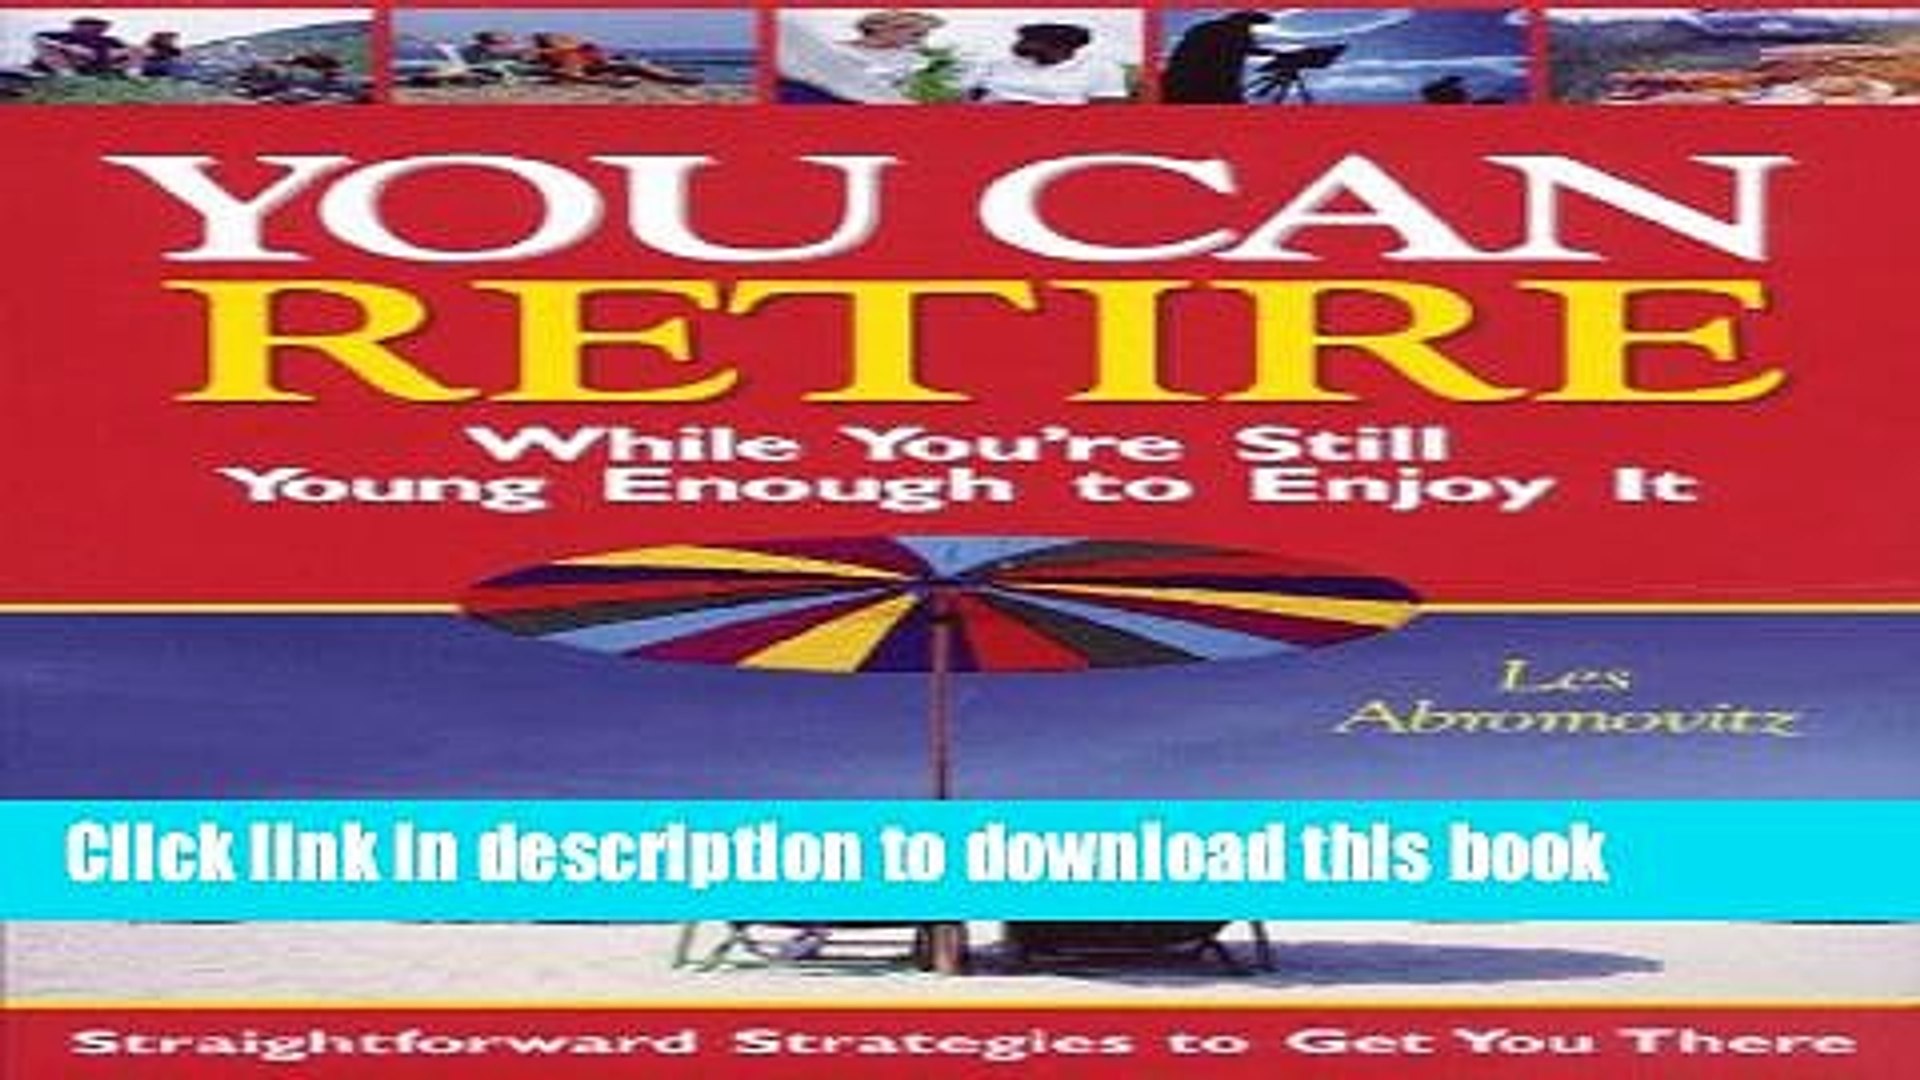 ⁣[Read PDF] You Can Retire: While You re Still Young Enough to Enjoy It Ebook Online